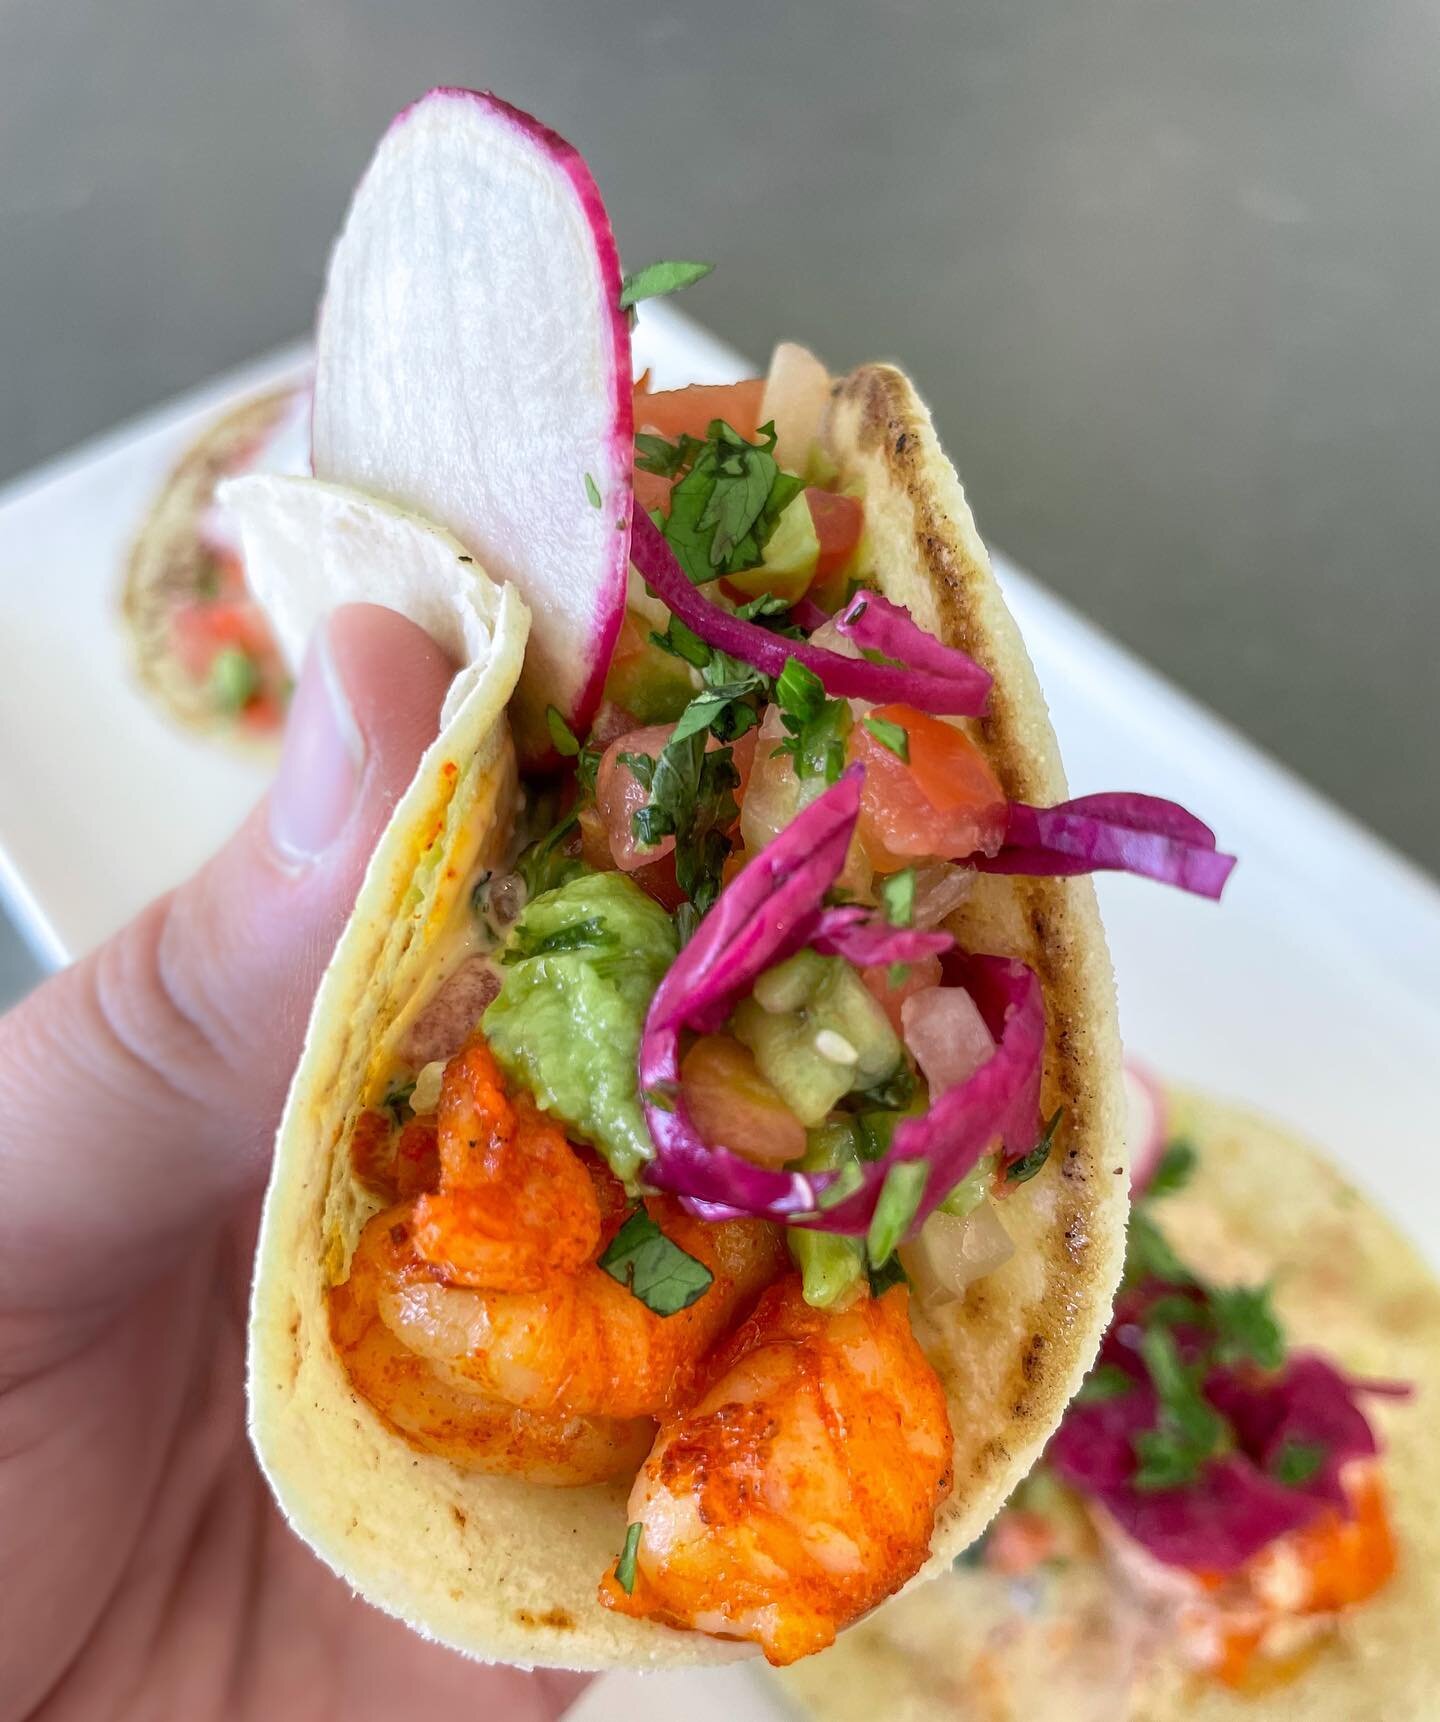 It&rsquo;s our Tres Tacos this beautiful Tuesday on the lake. Choose from shrimp, chicken, brisket, or potato. 

Our regular menu is back after the holiday weekend so come in for your favorites! ☀️